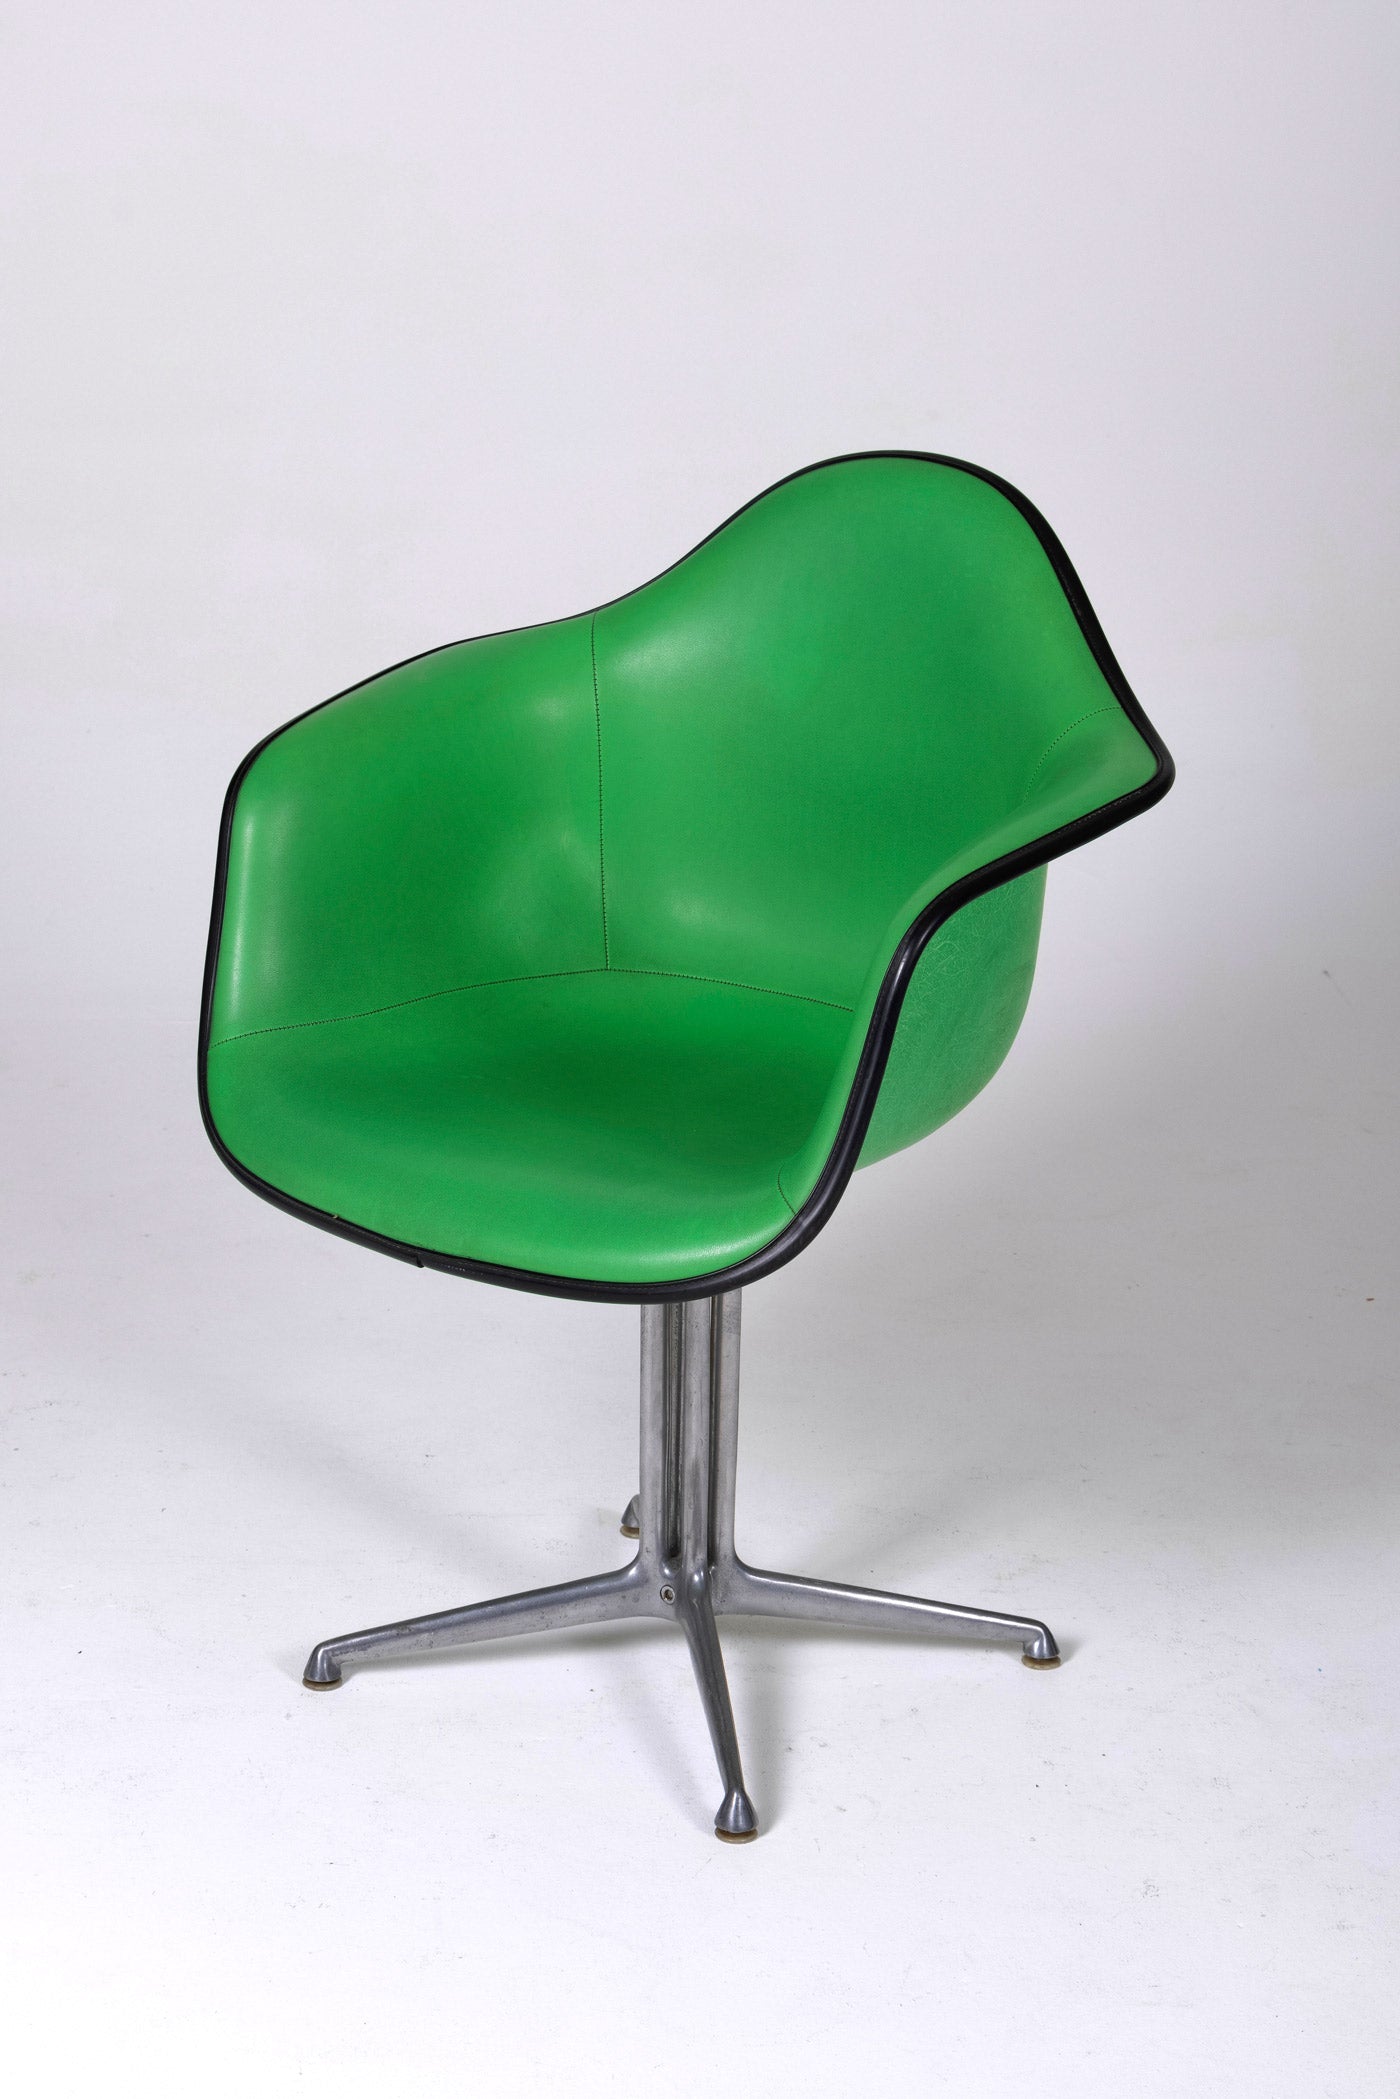 La Fonda armchair by Charles and Ray Eames